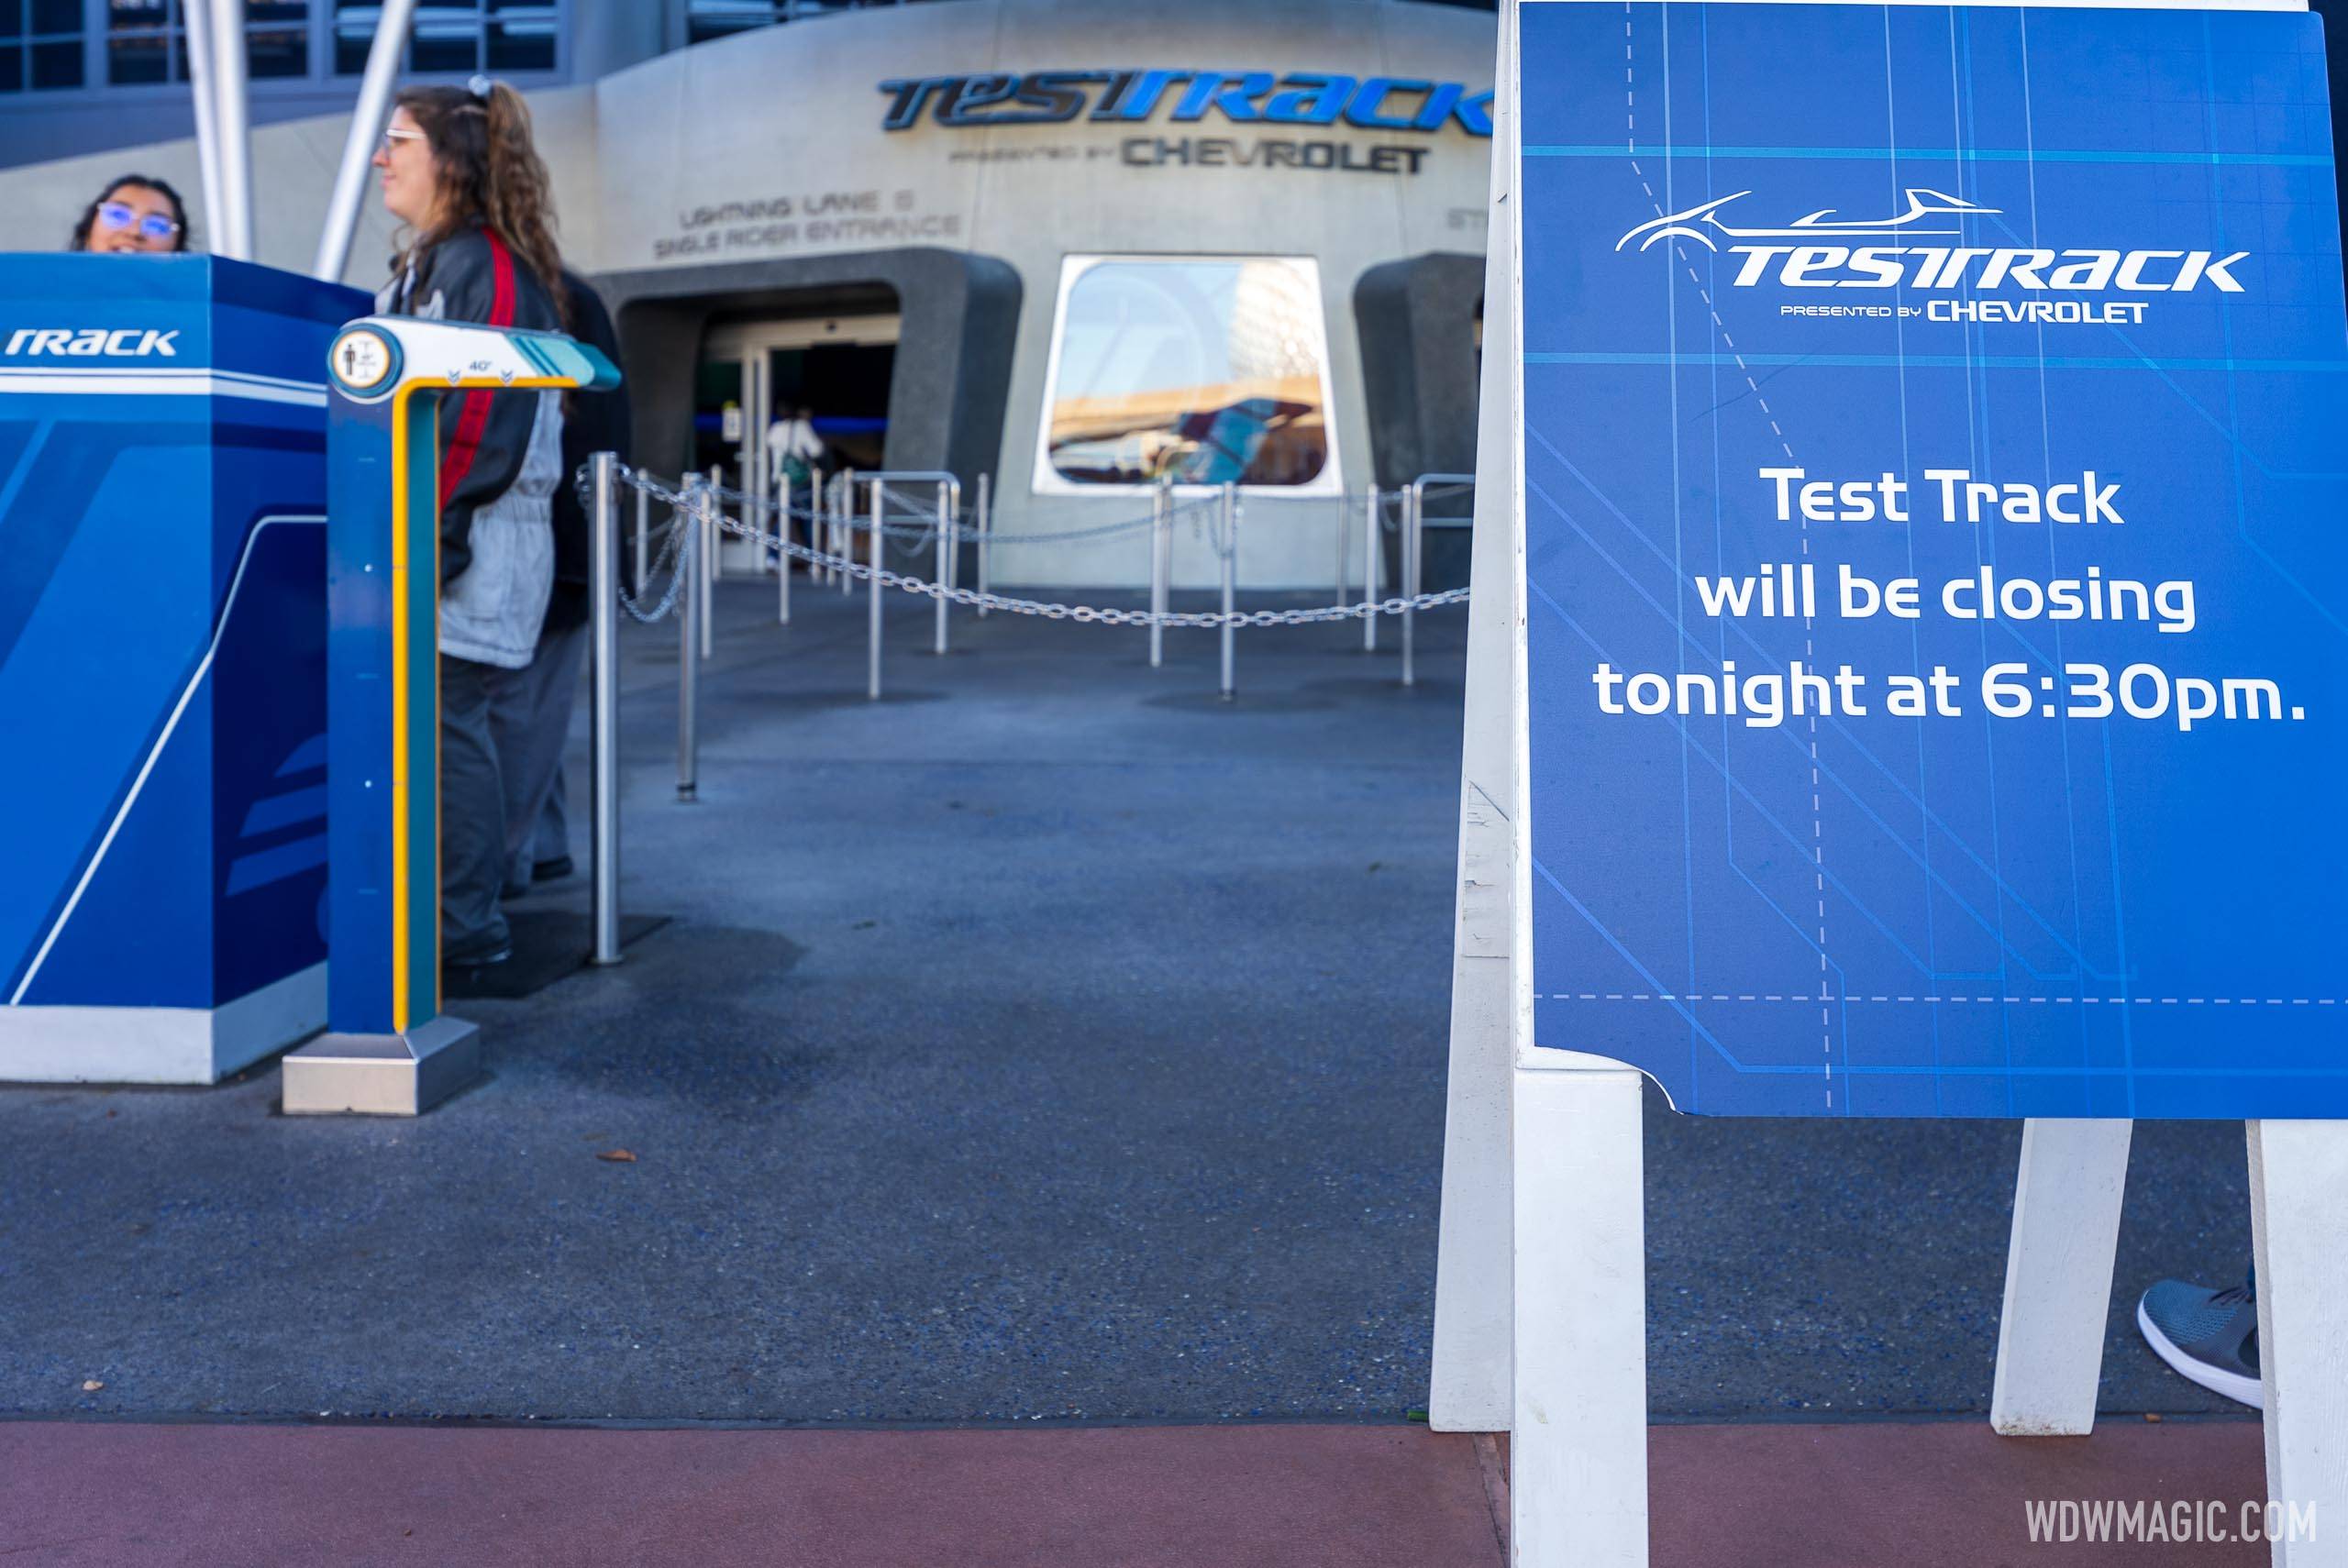 Test Track early closure